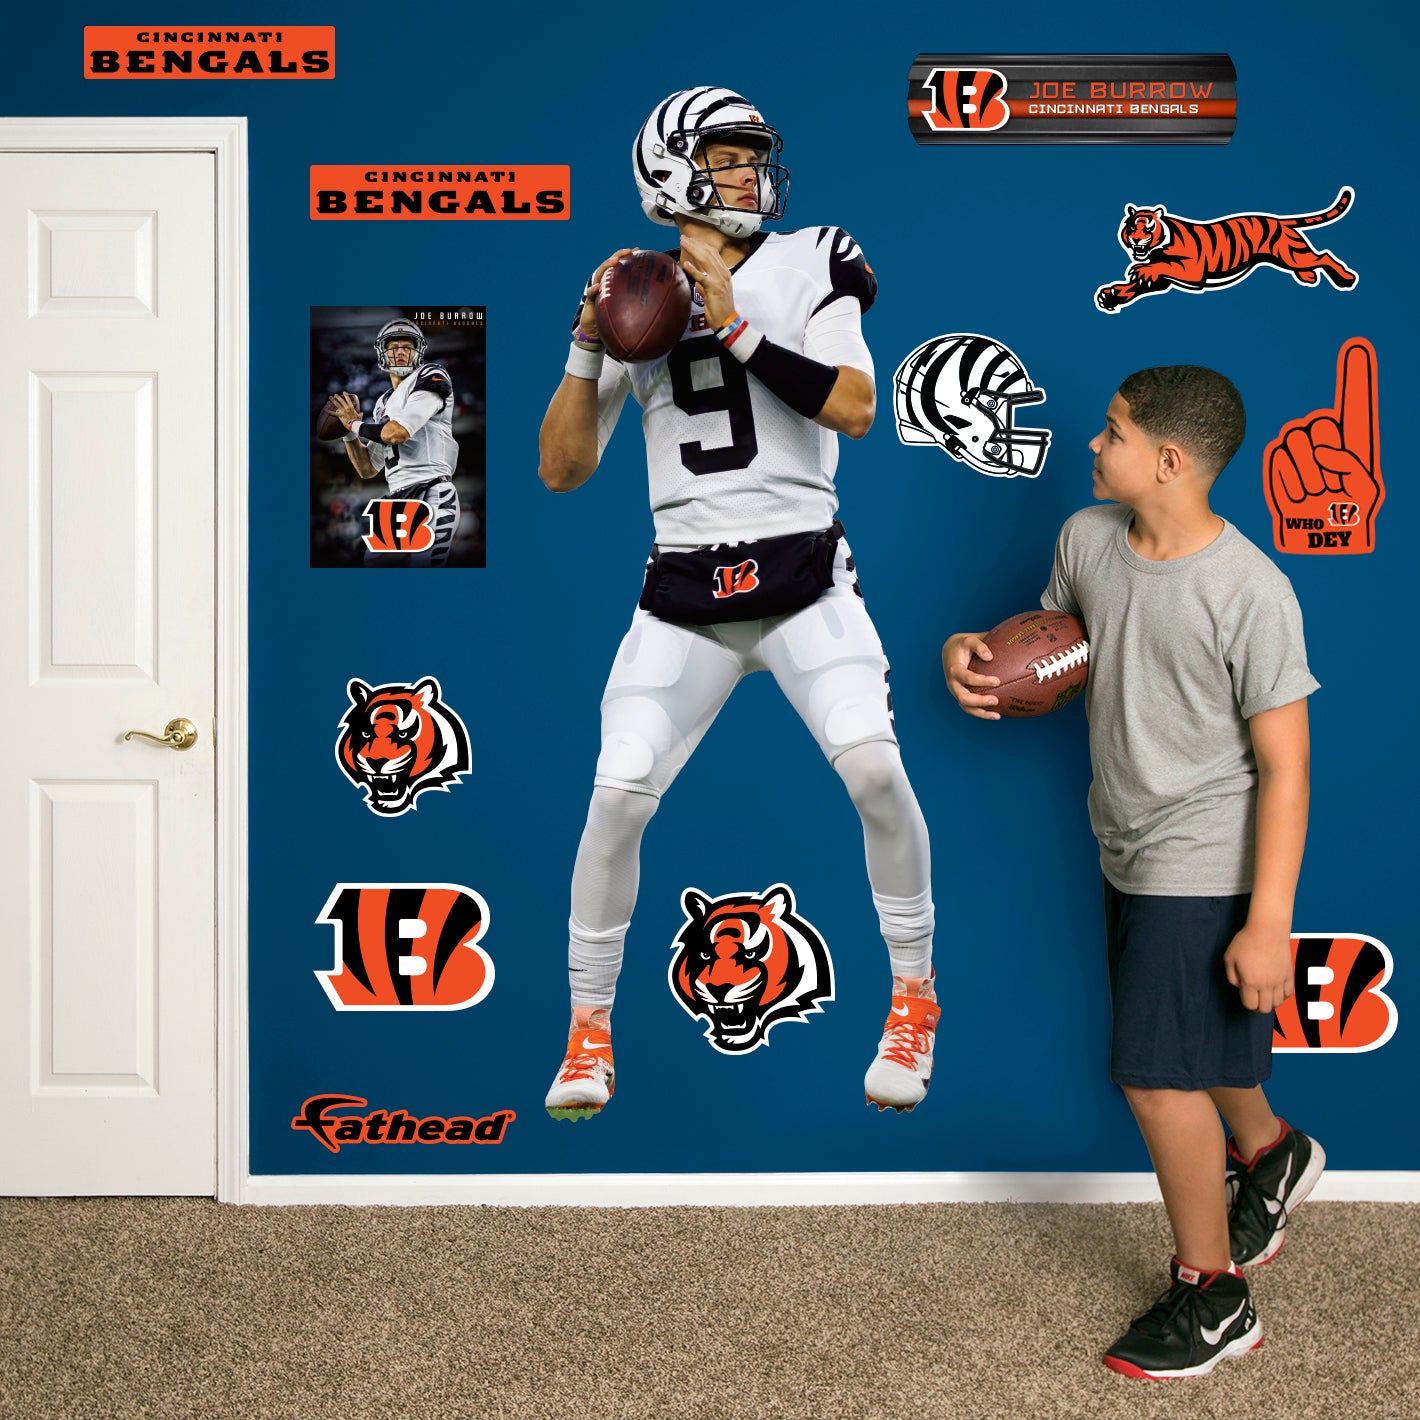 Cincinnati Bengals: Joe Burrow  White Uniform        - Officially Licensed NFL Removable     Adhesive Decal